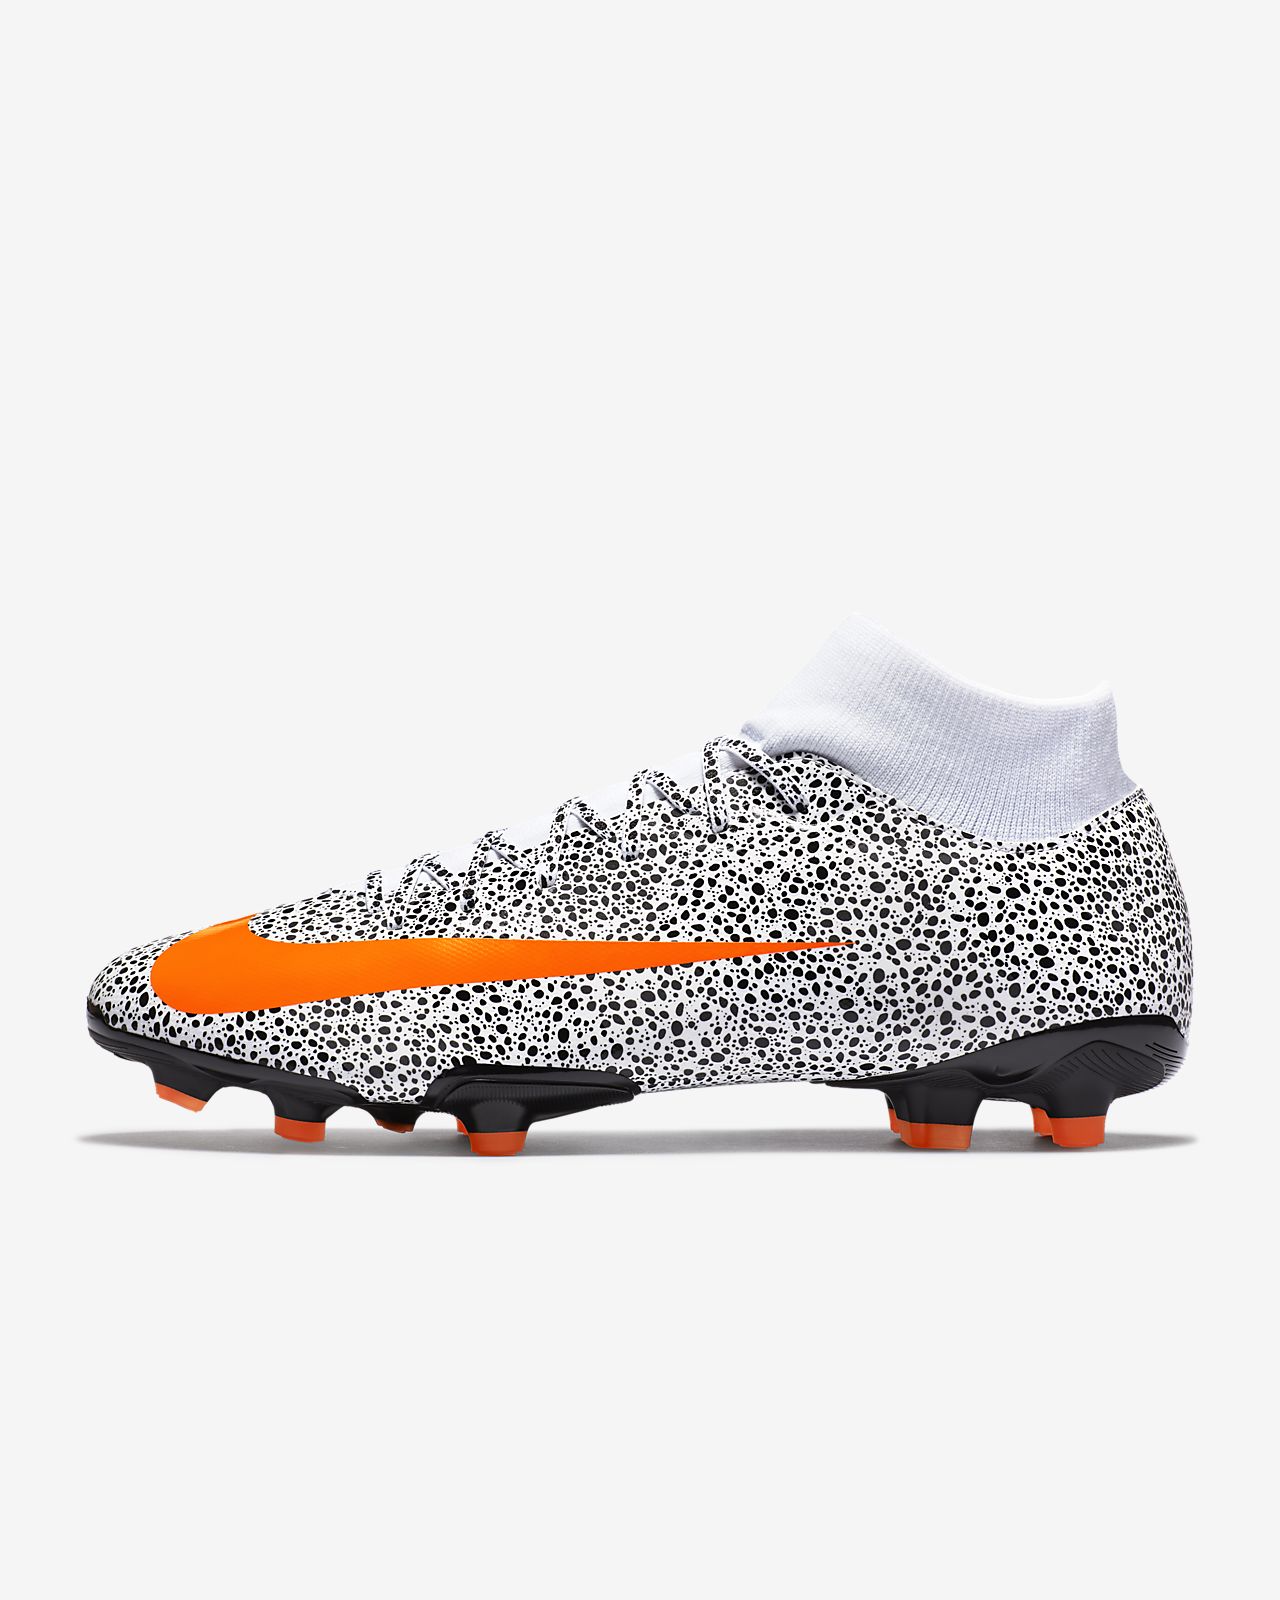 mercurial superfly cr7 2019